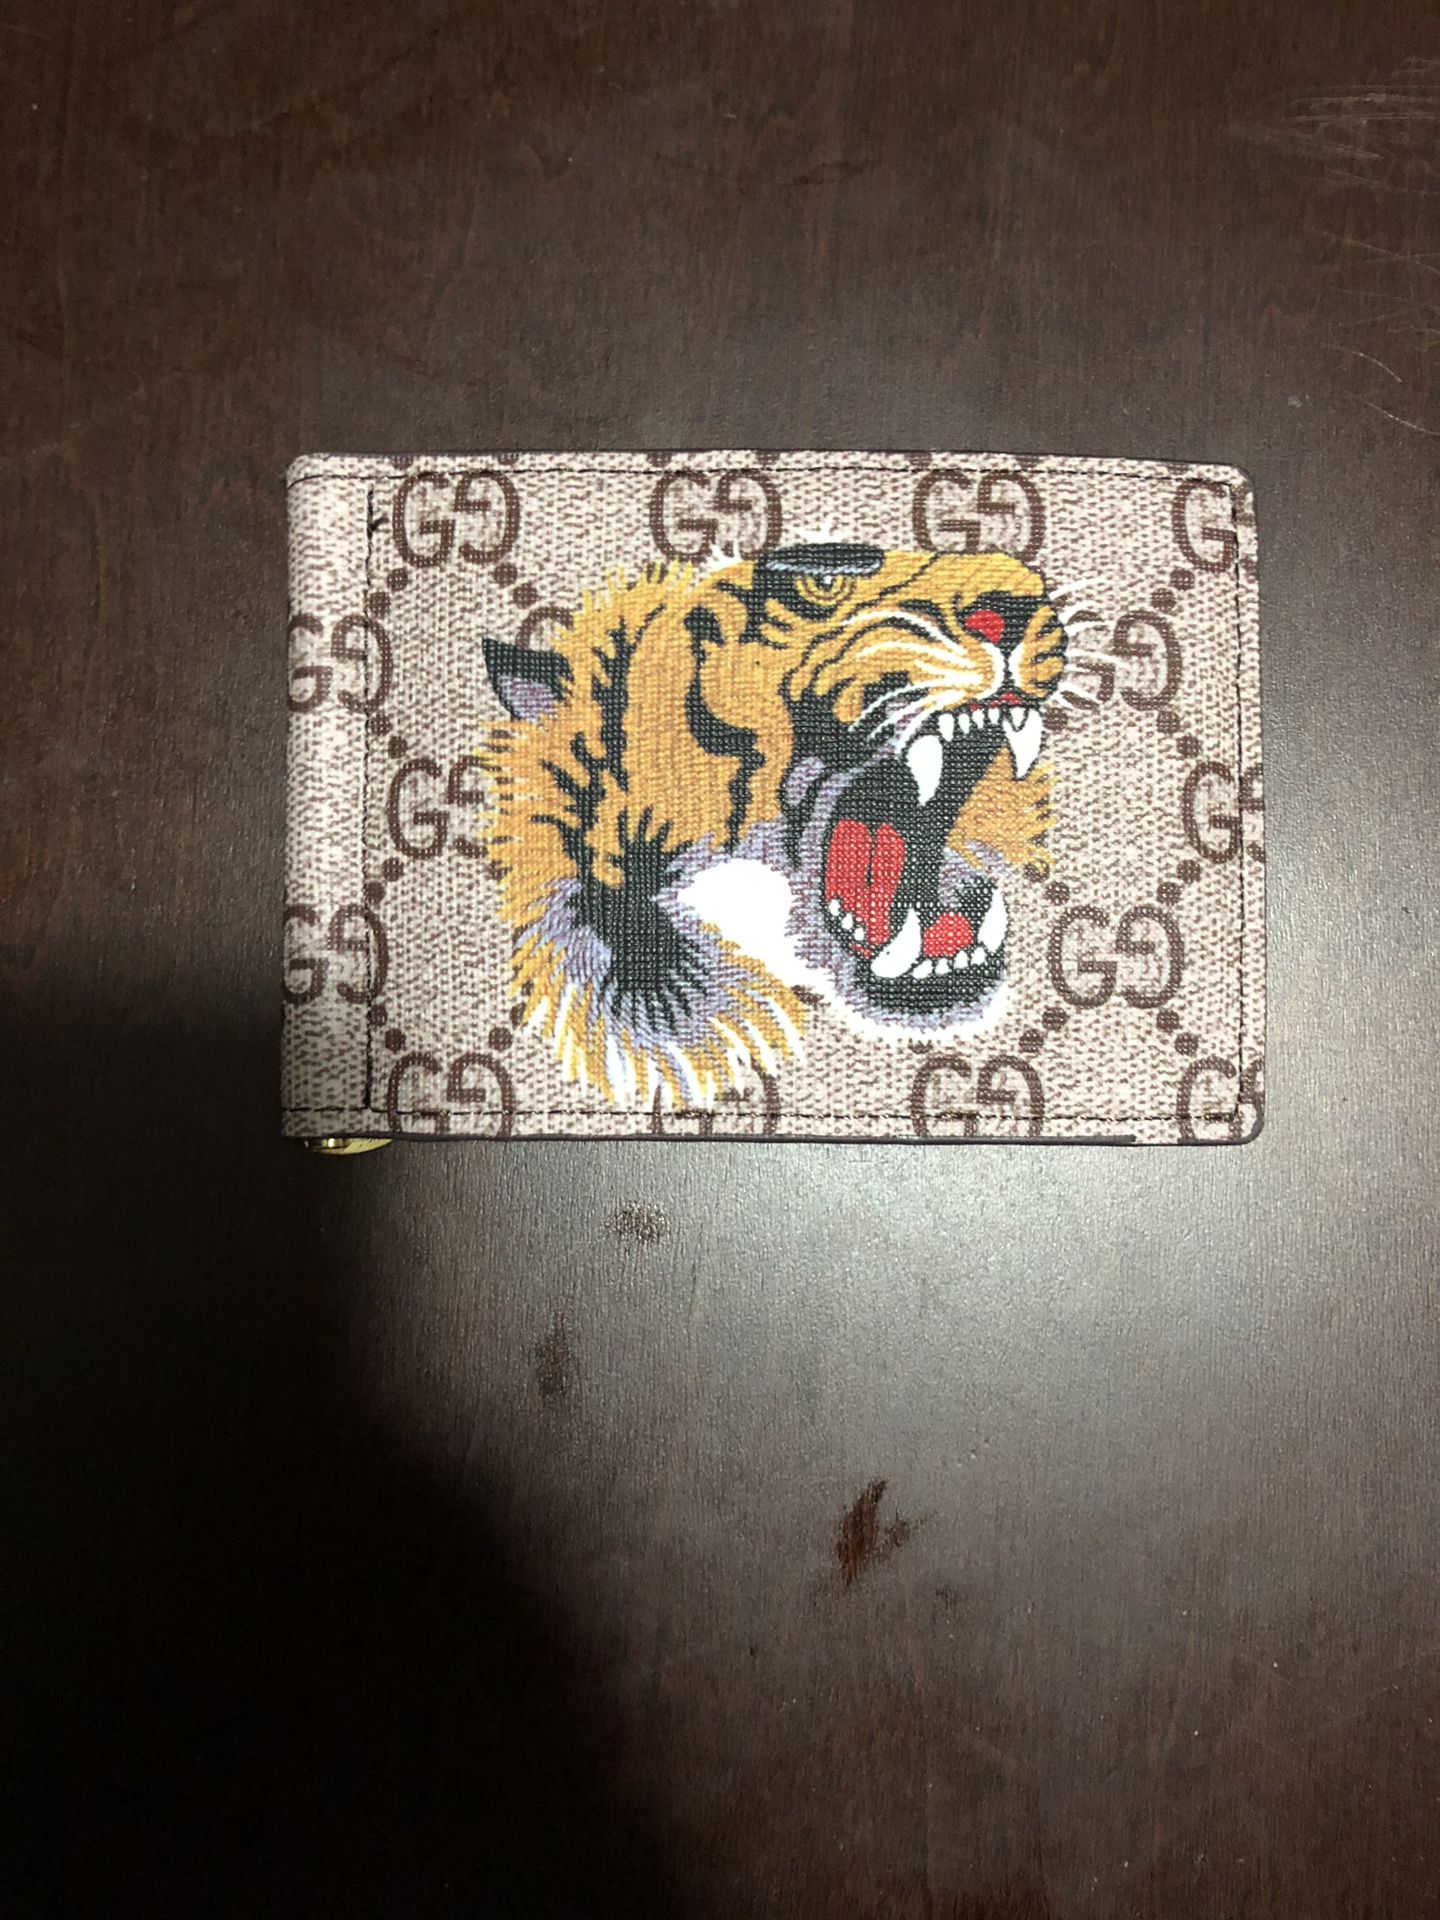 Gucci Wallet / Money Clip -Tiger Print Gg Supreme WILL TRADE FOR SNOWBOARD  for Sale in Mesa, AZ - OfferUp